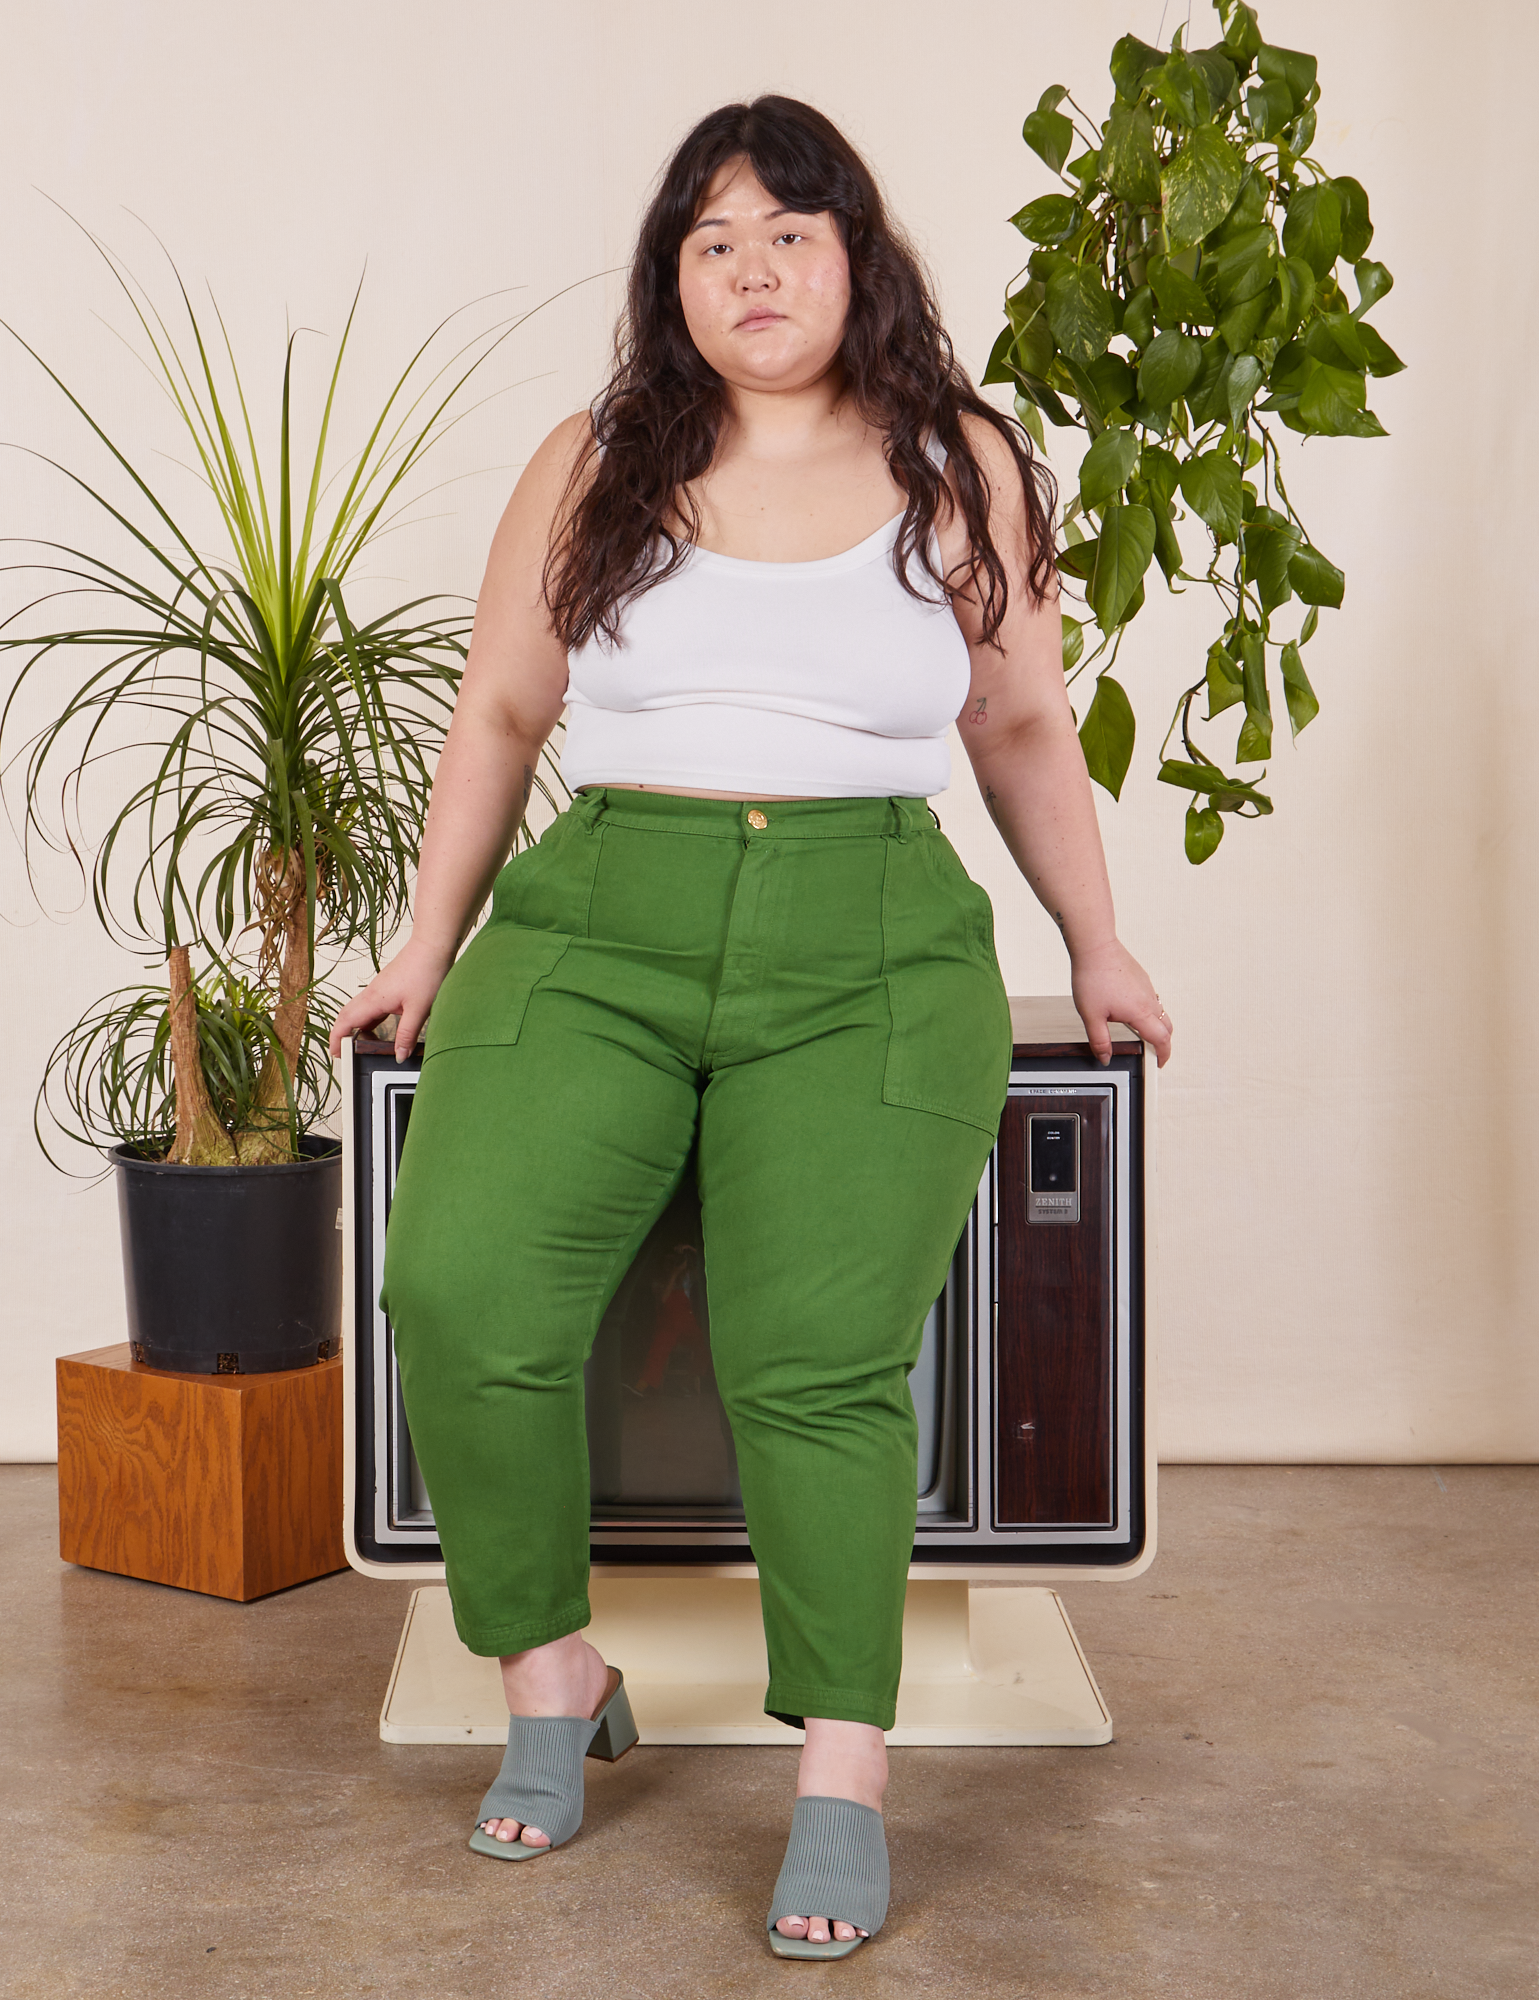 Ashley is wearing Petite Pencil Pants in Lawn Green and Cropped Cami in vintage tee off-white